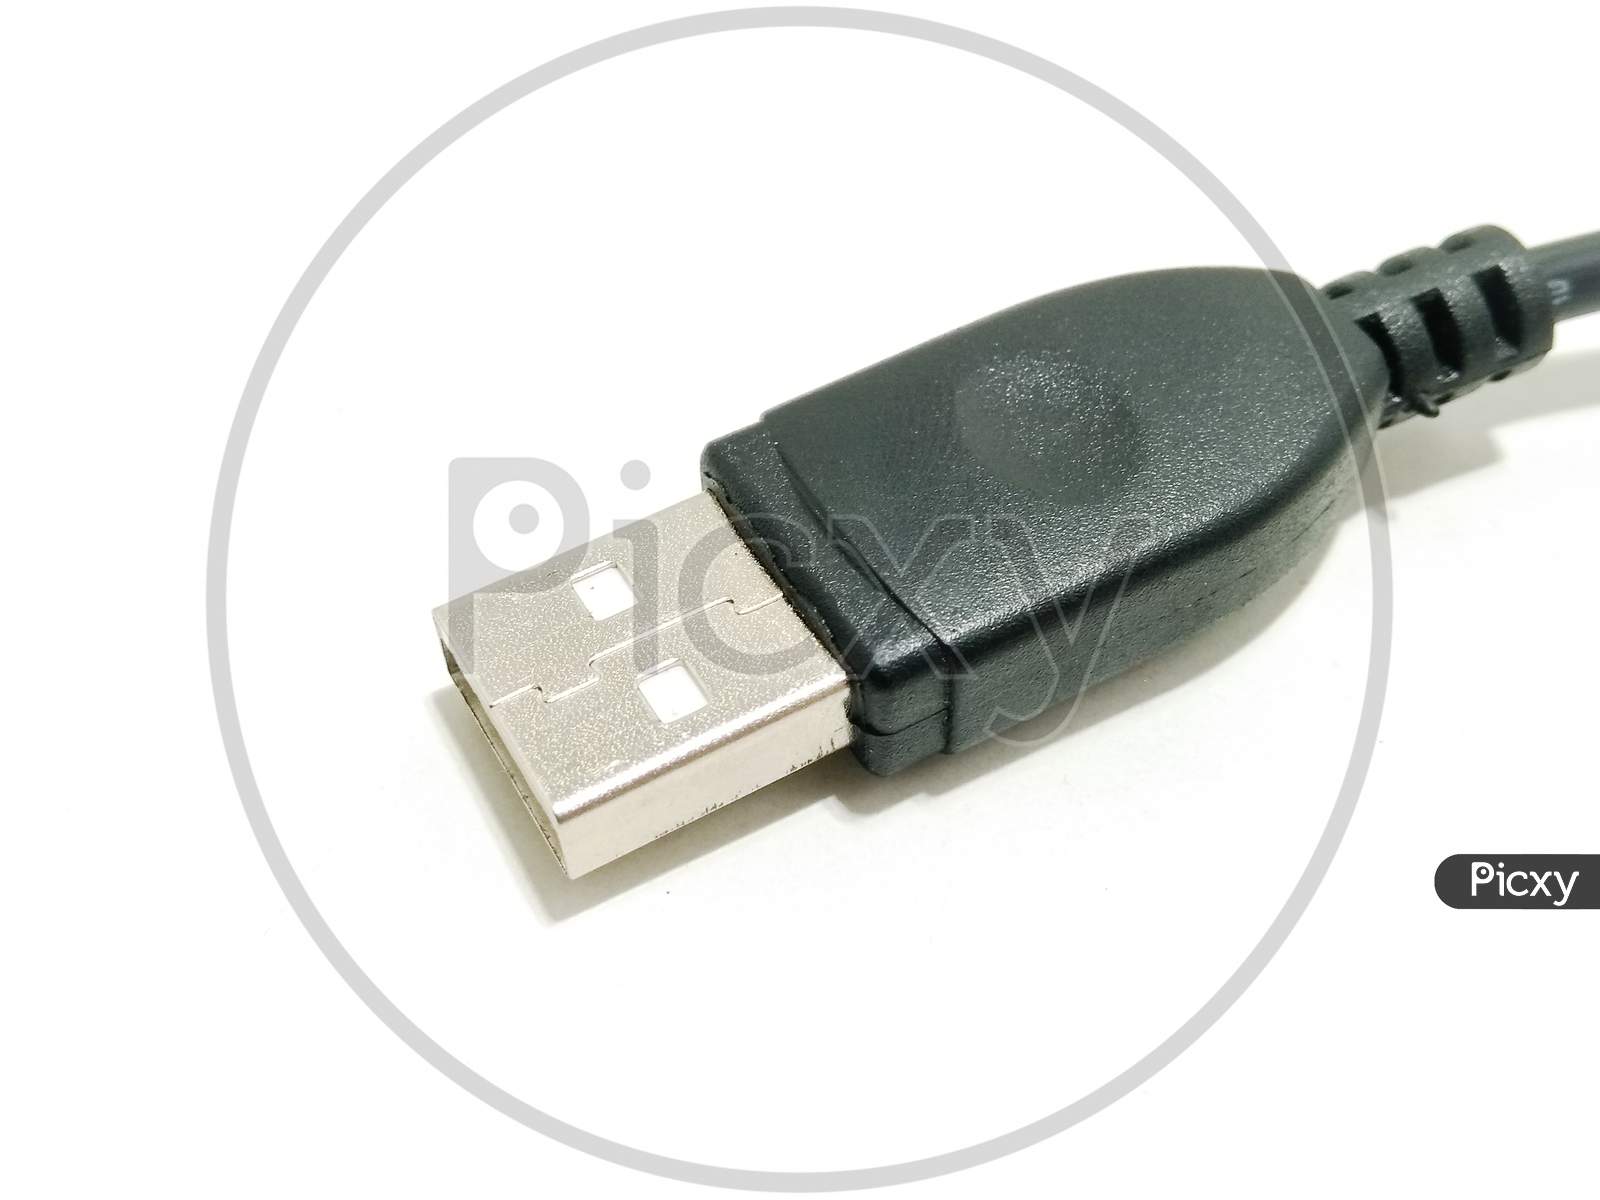 A picture of usb